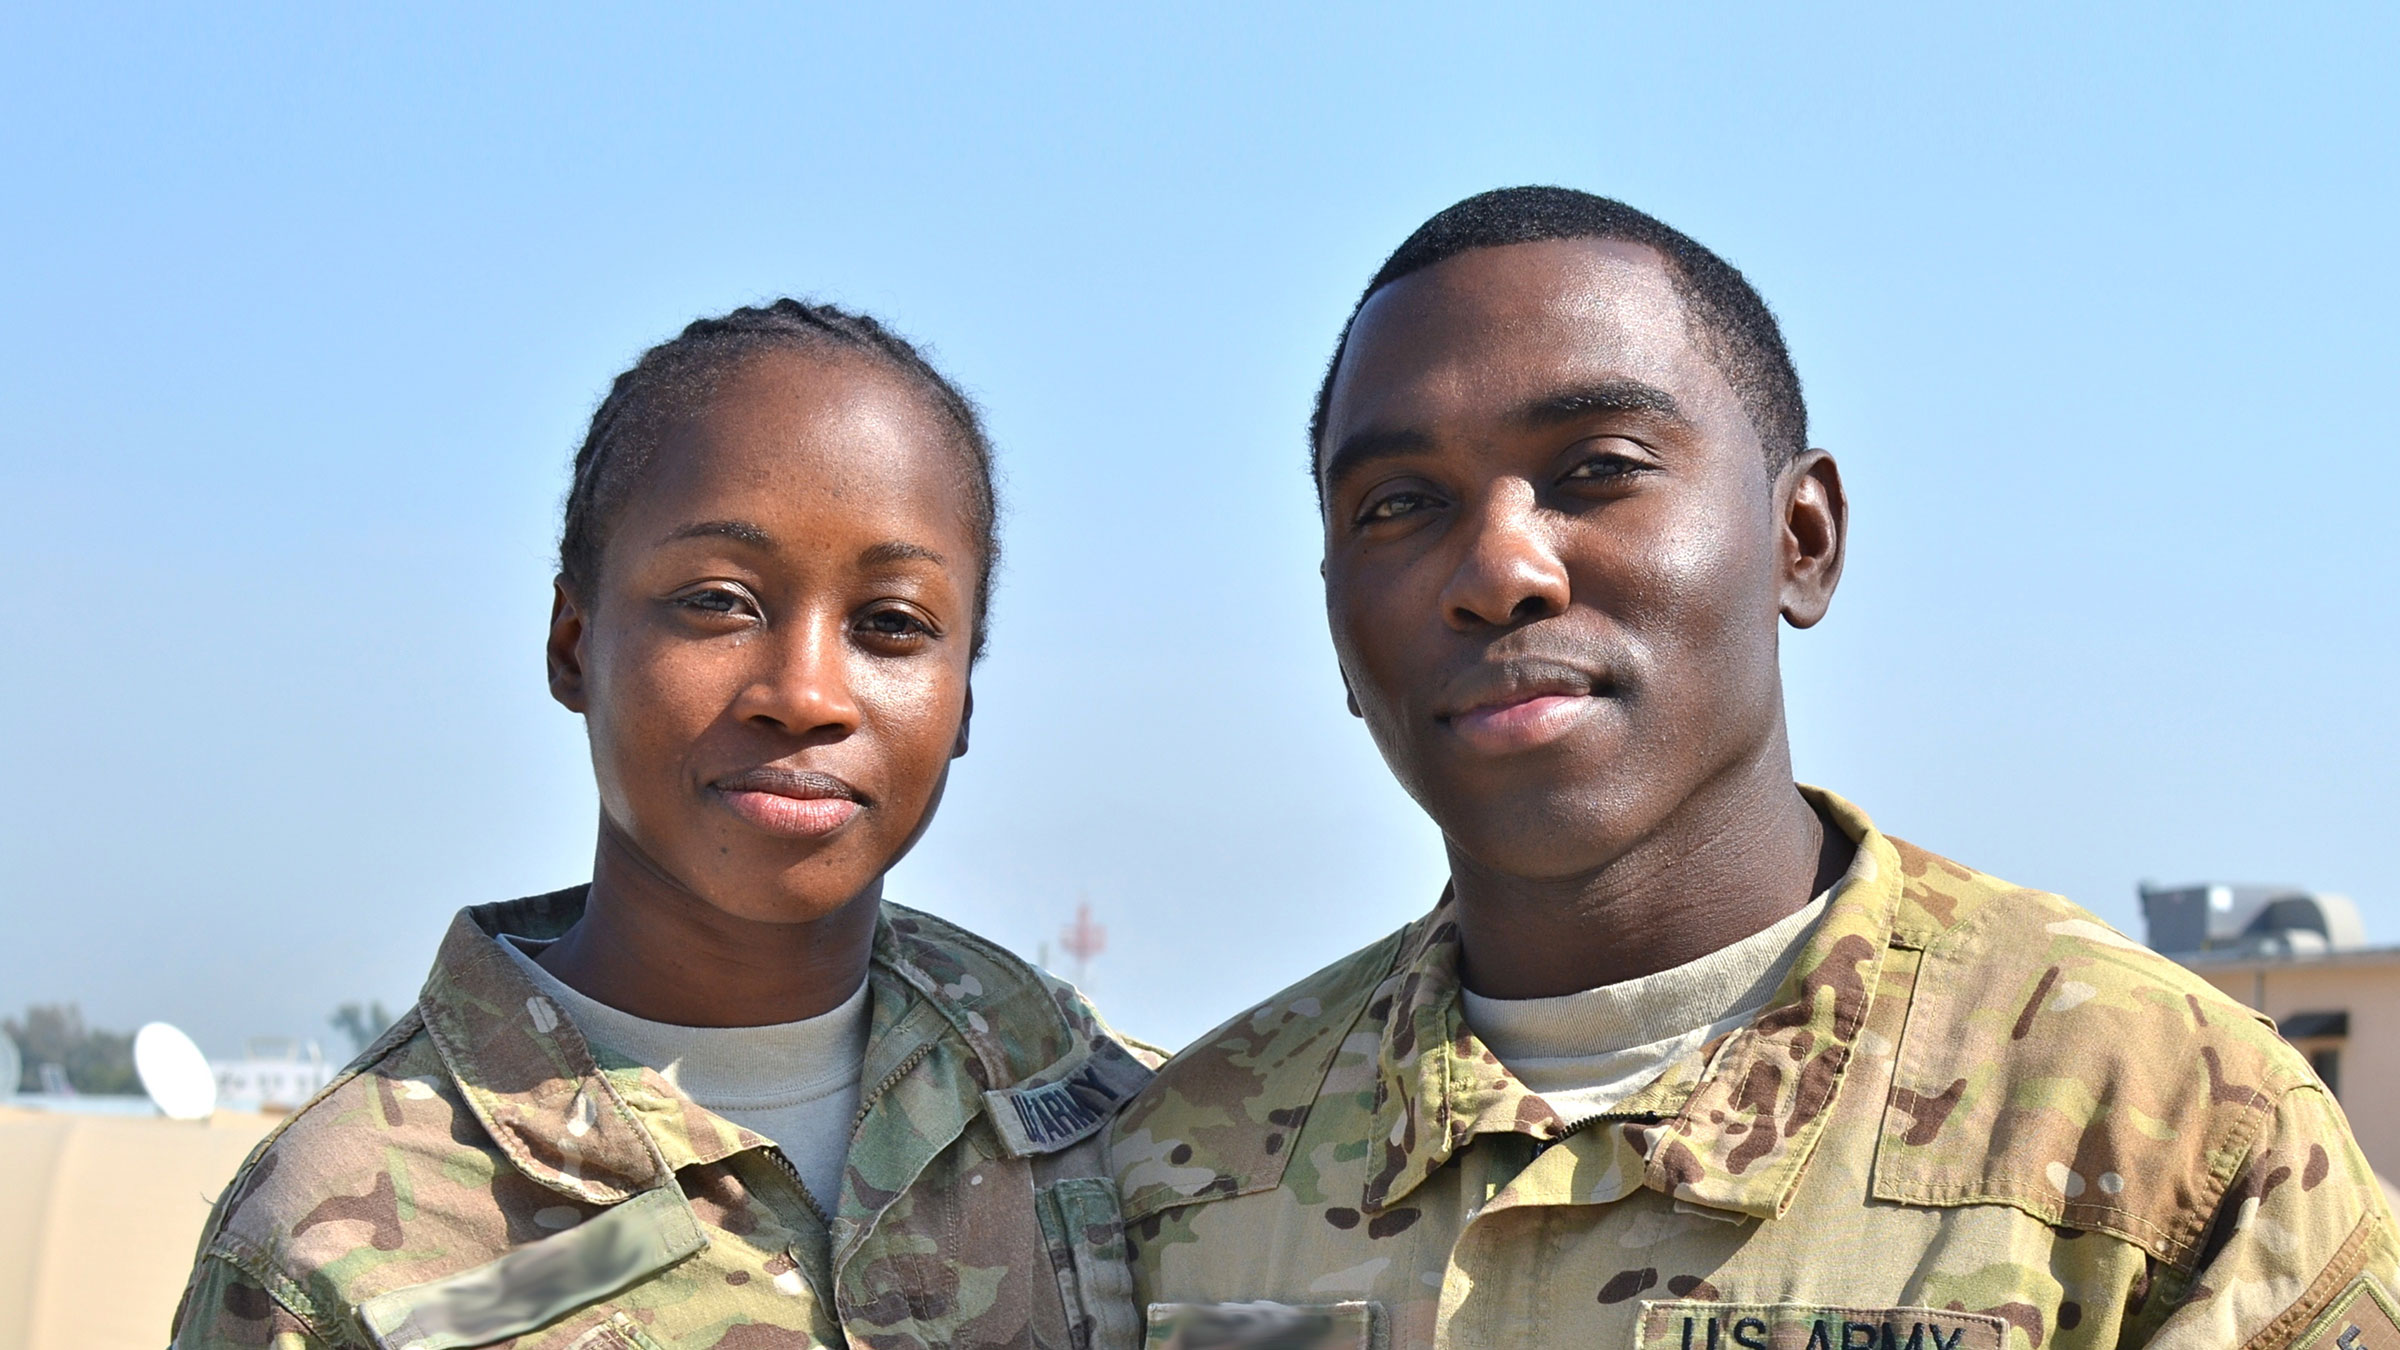 Getting Married in the Military | Strong Military Relationships ...